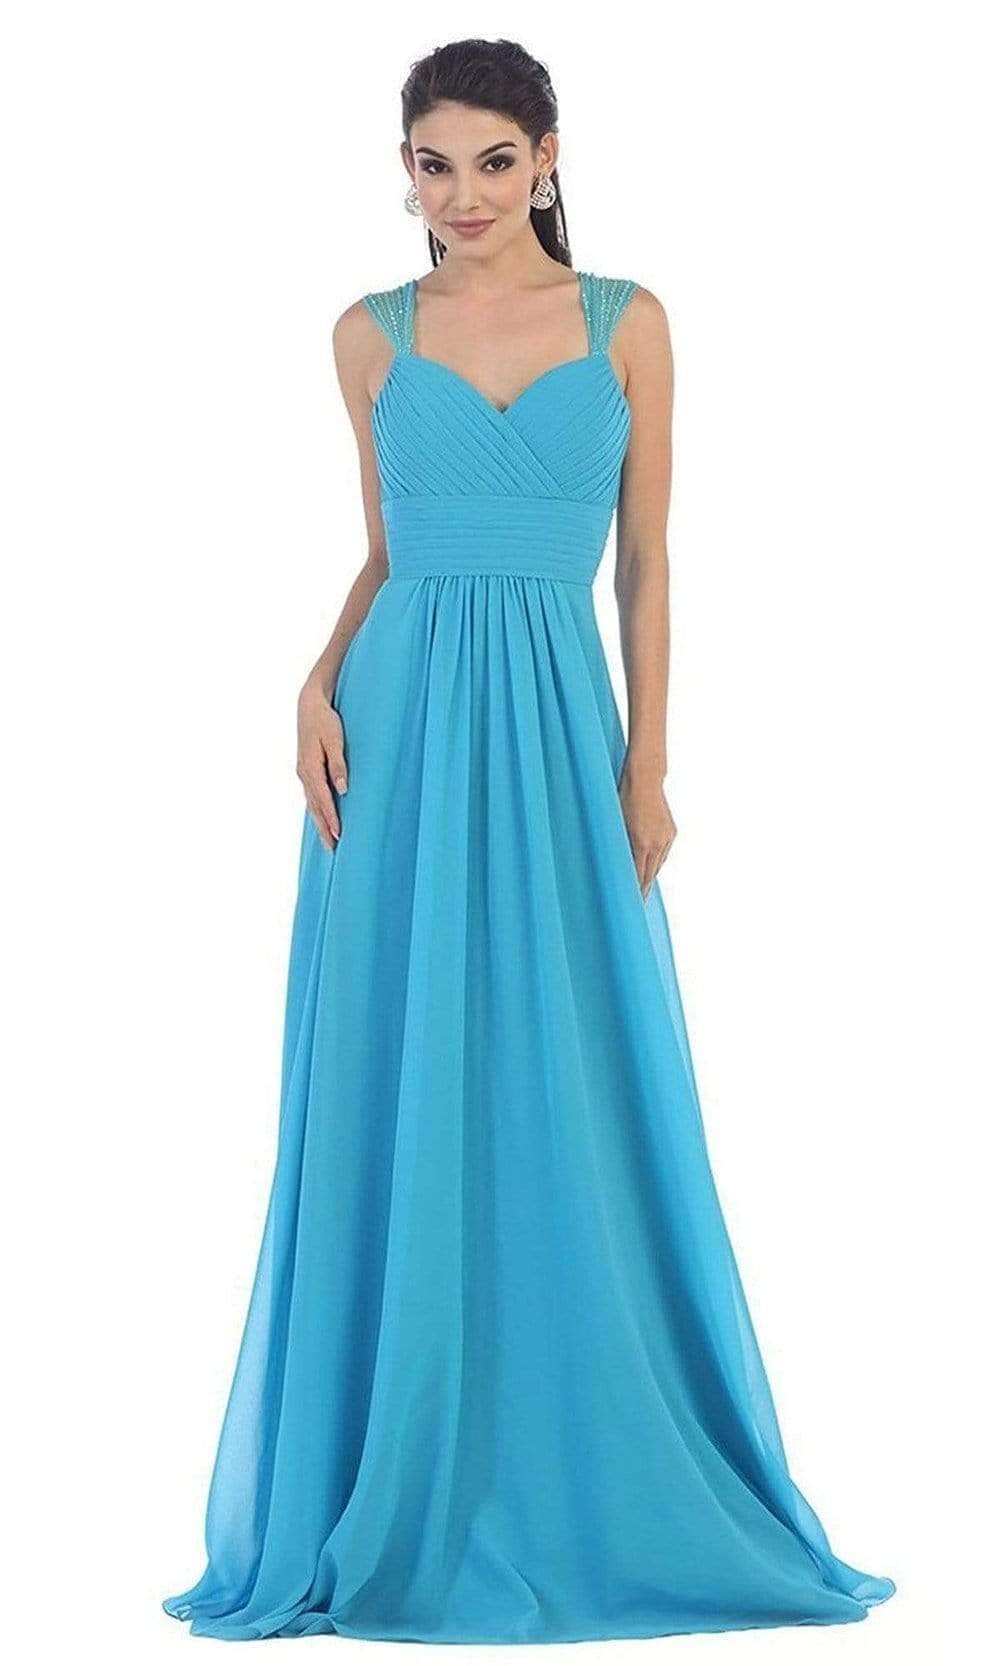 May Queen - MQ1275 Pleated Bodice Sweetheart Neck A-Line Dress